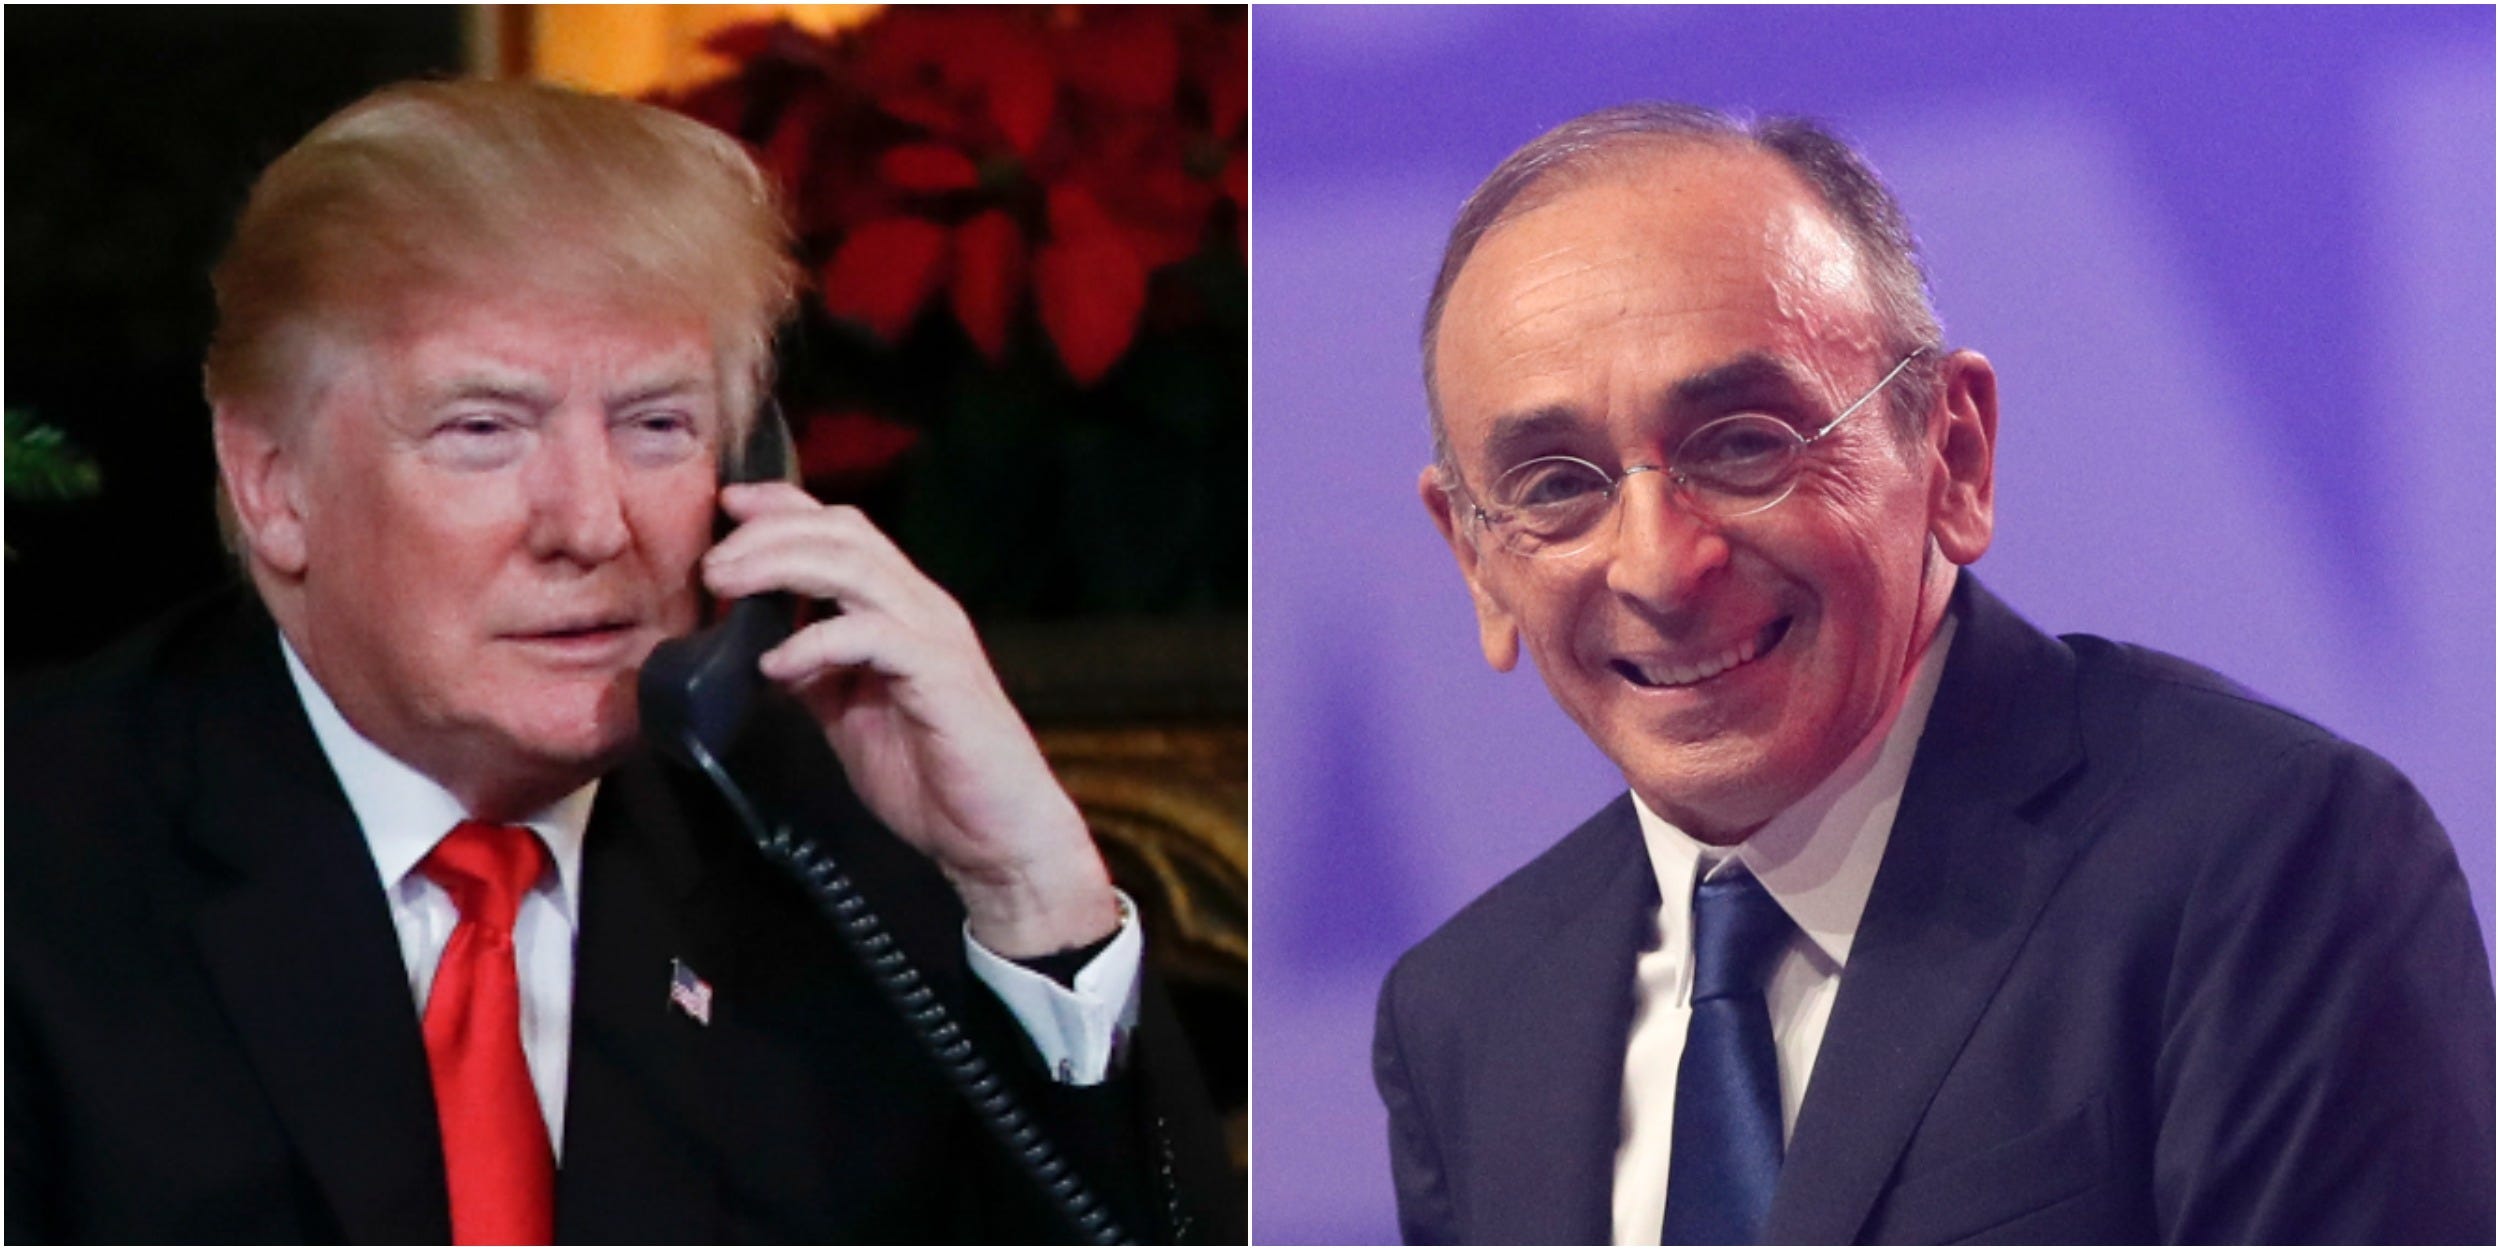 Collage: Donald Trump and Eric Zemmour